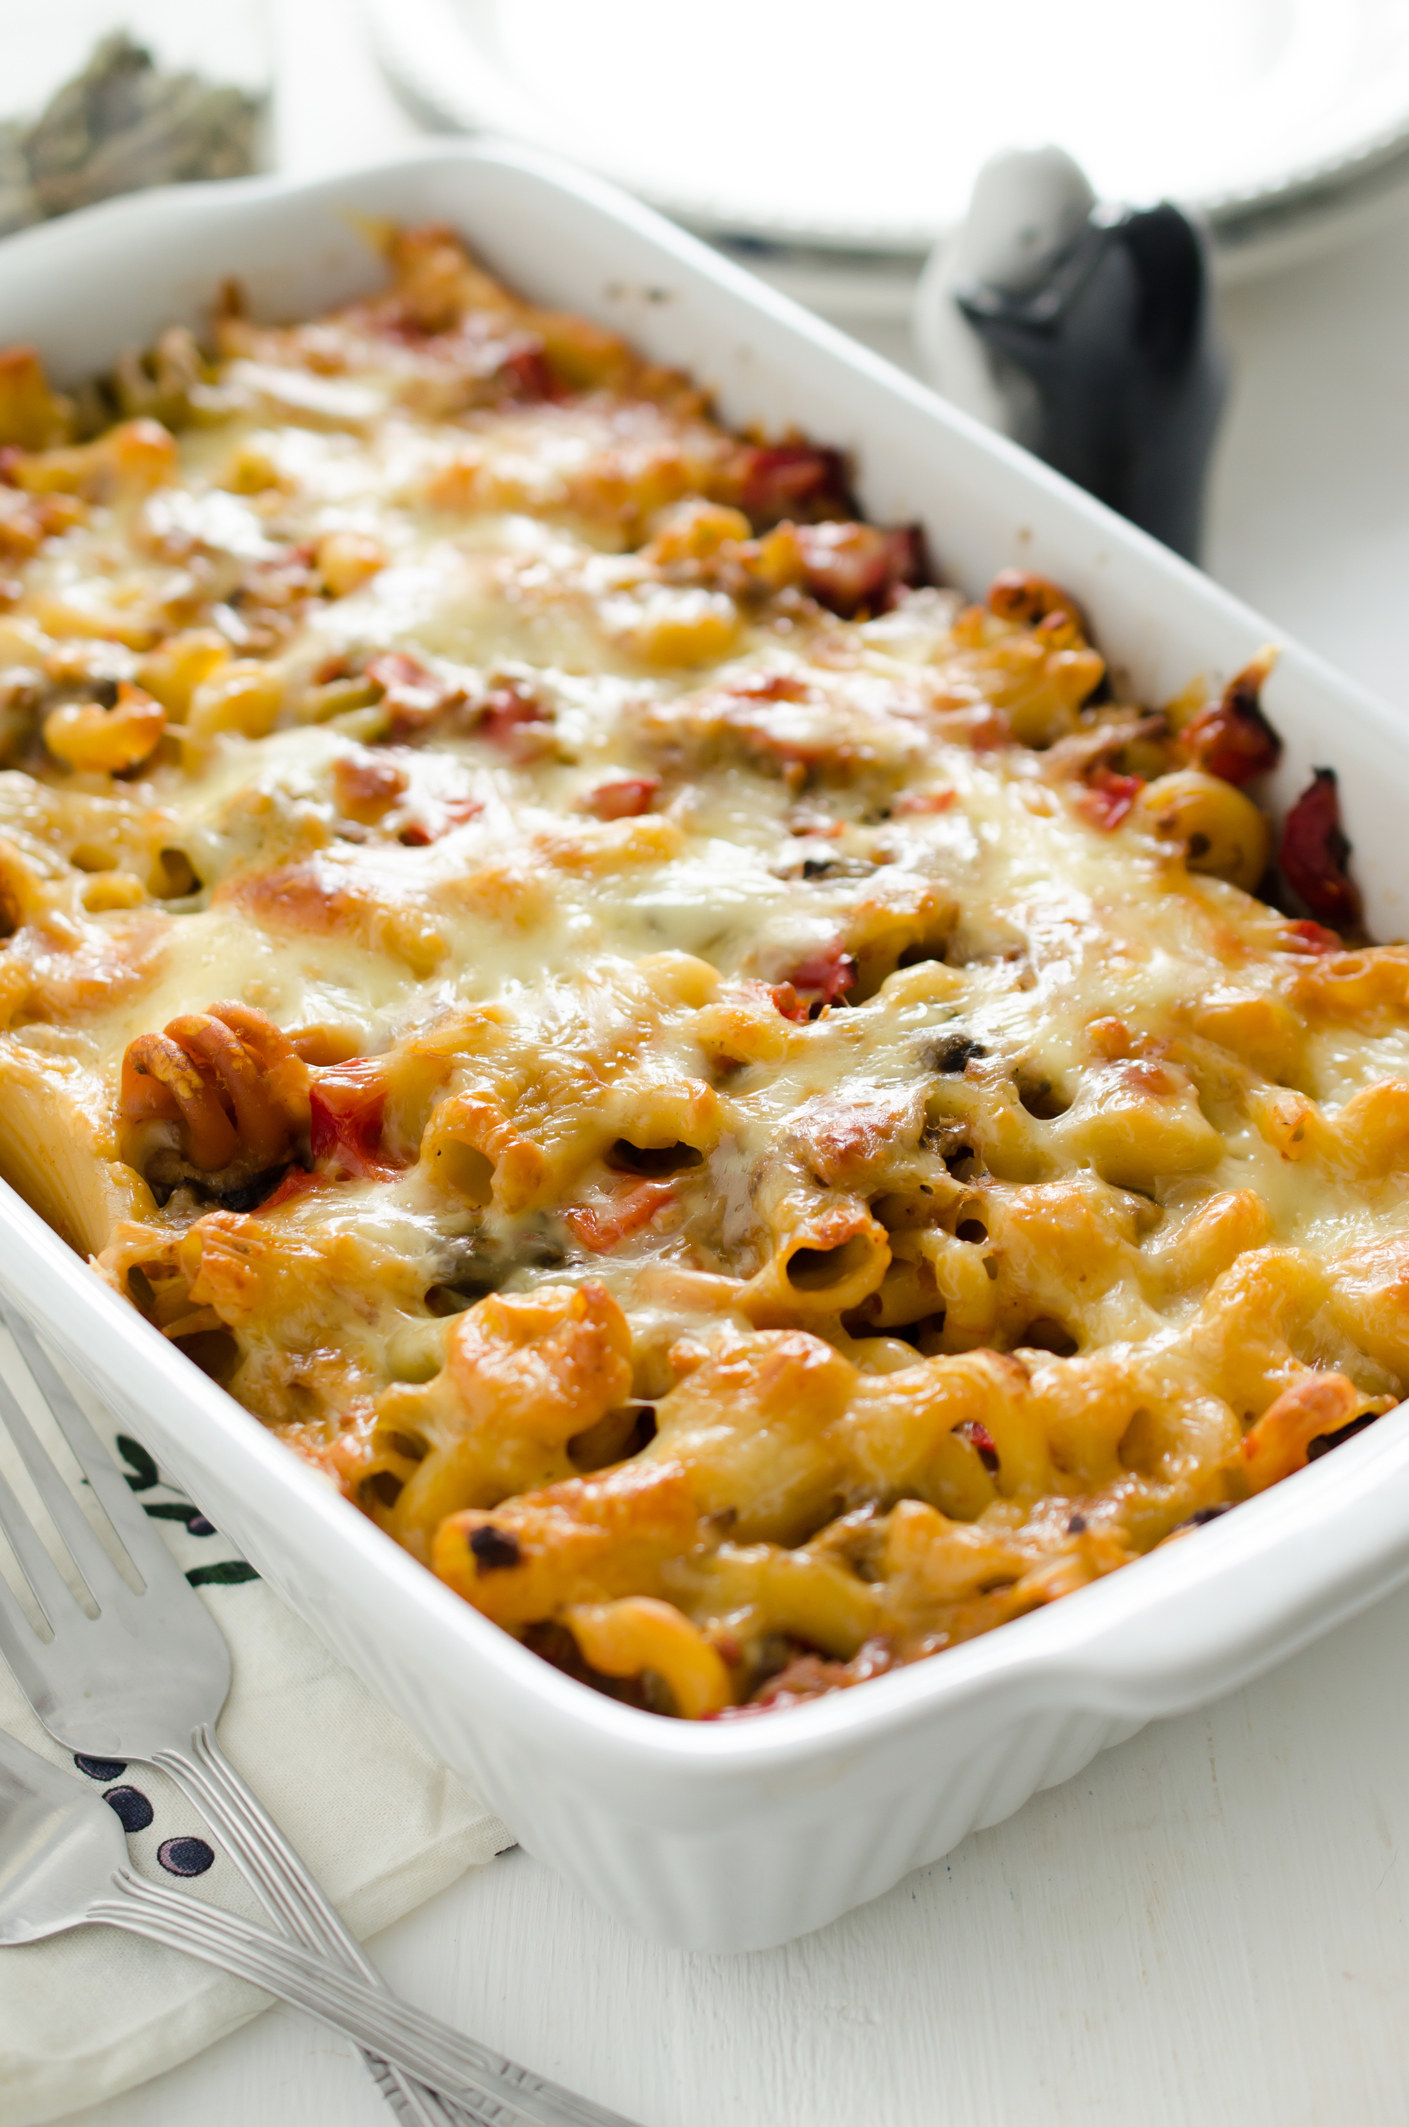 Maccaroni casserole with tuna fish, mushroom, red bell pepper and cheese